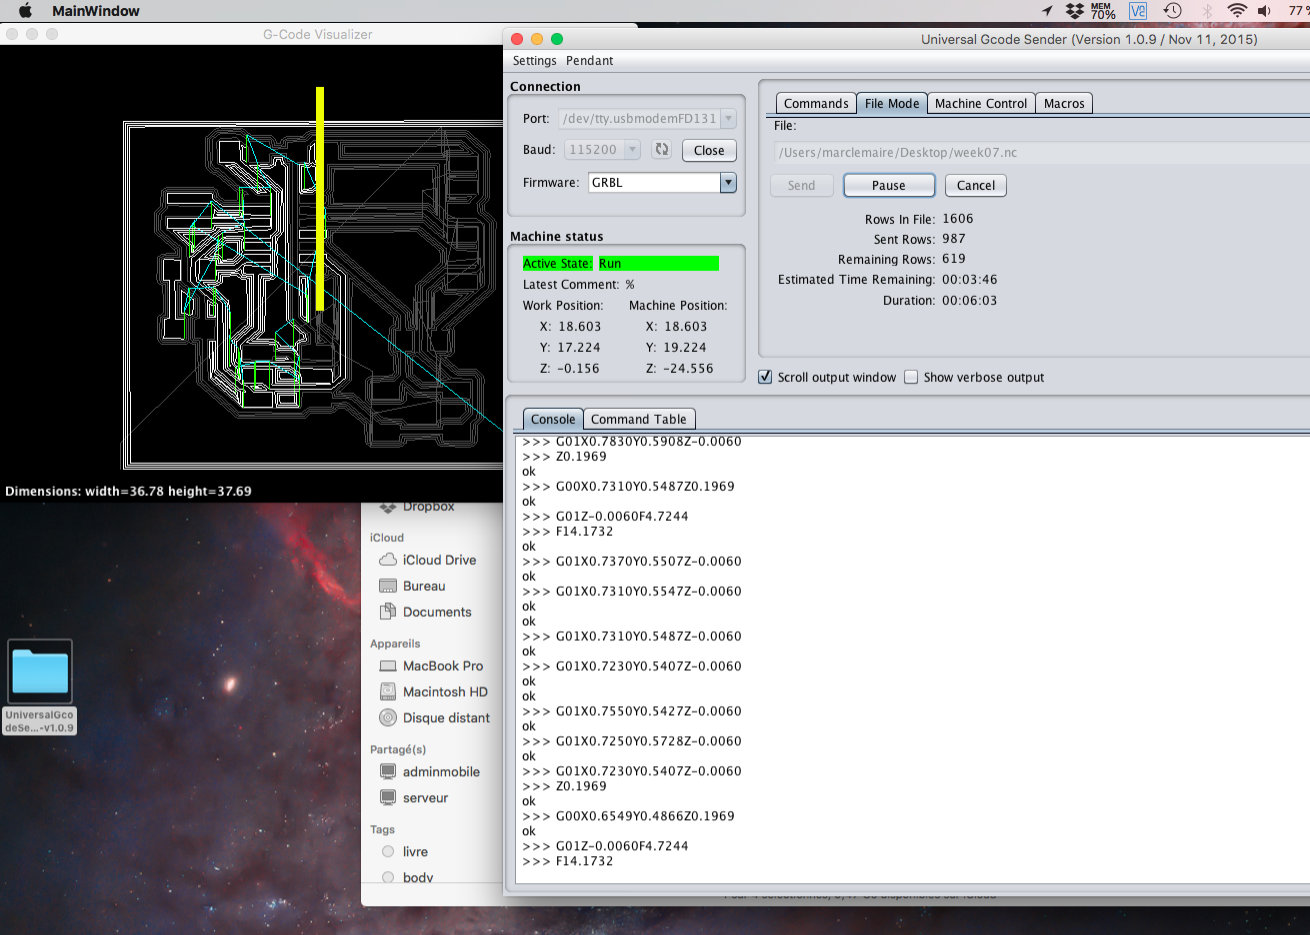 The Universal Gcode Sender making my PCB with the visualiser